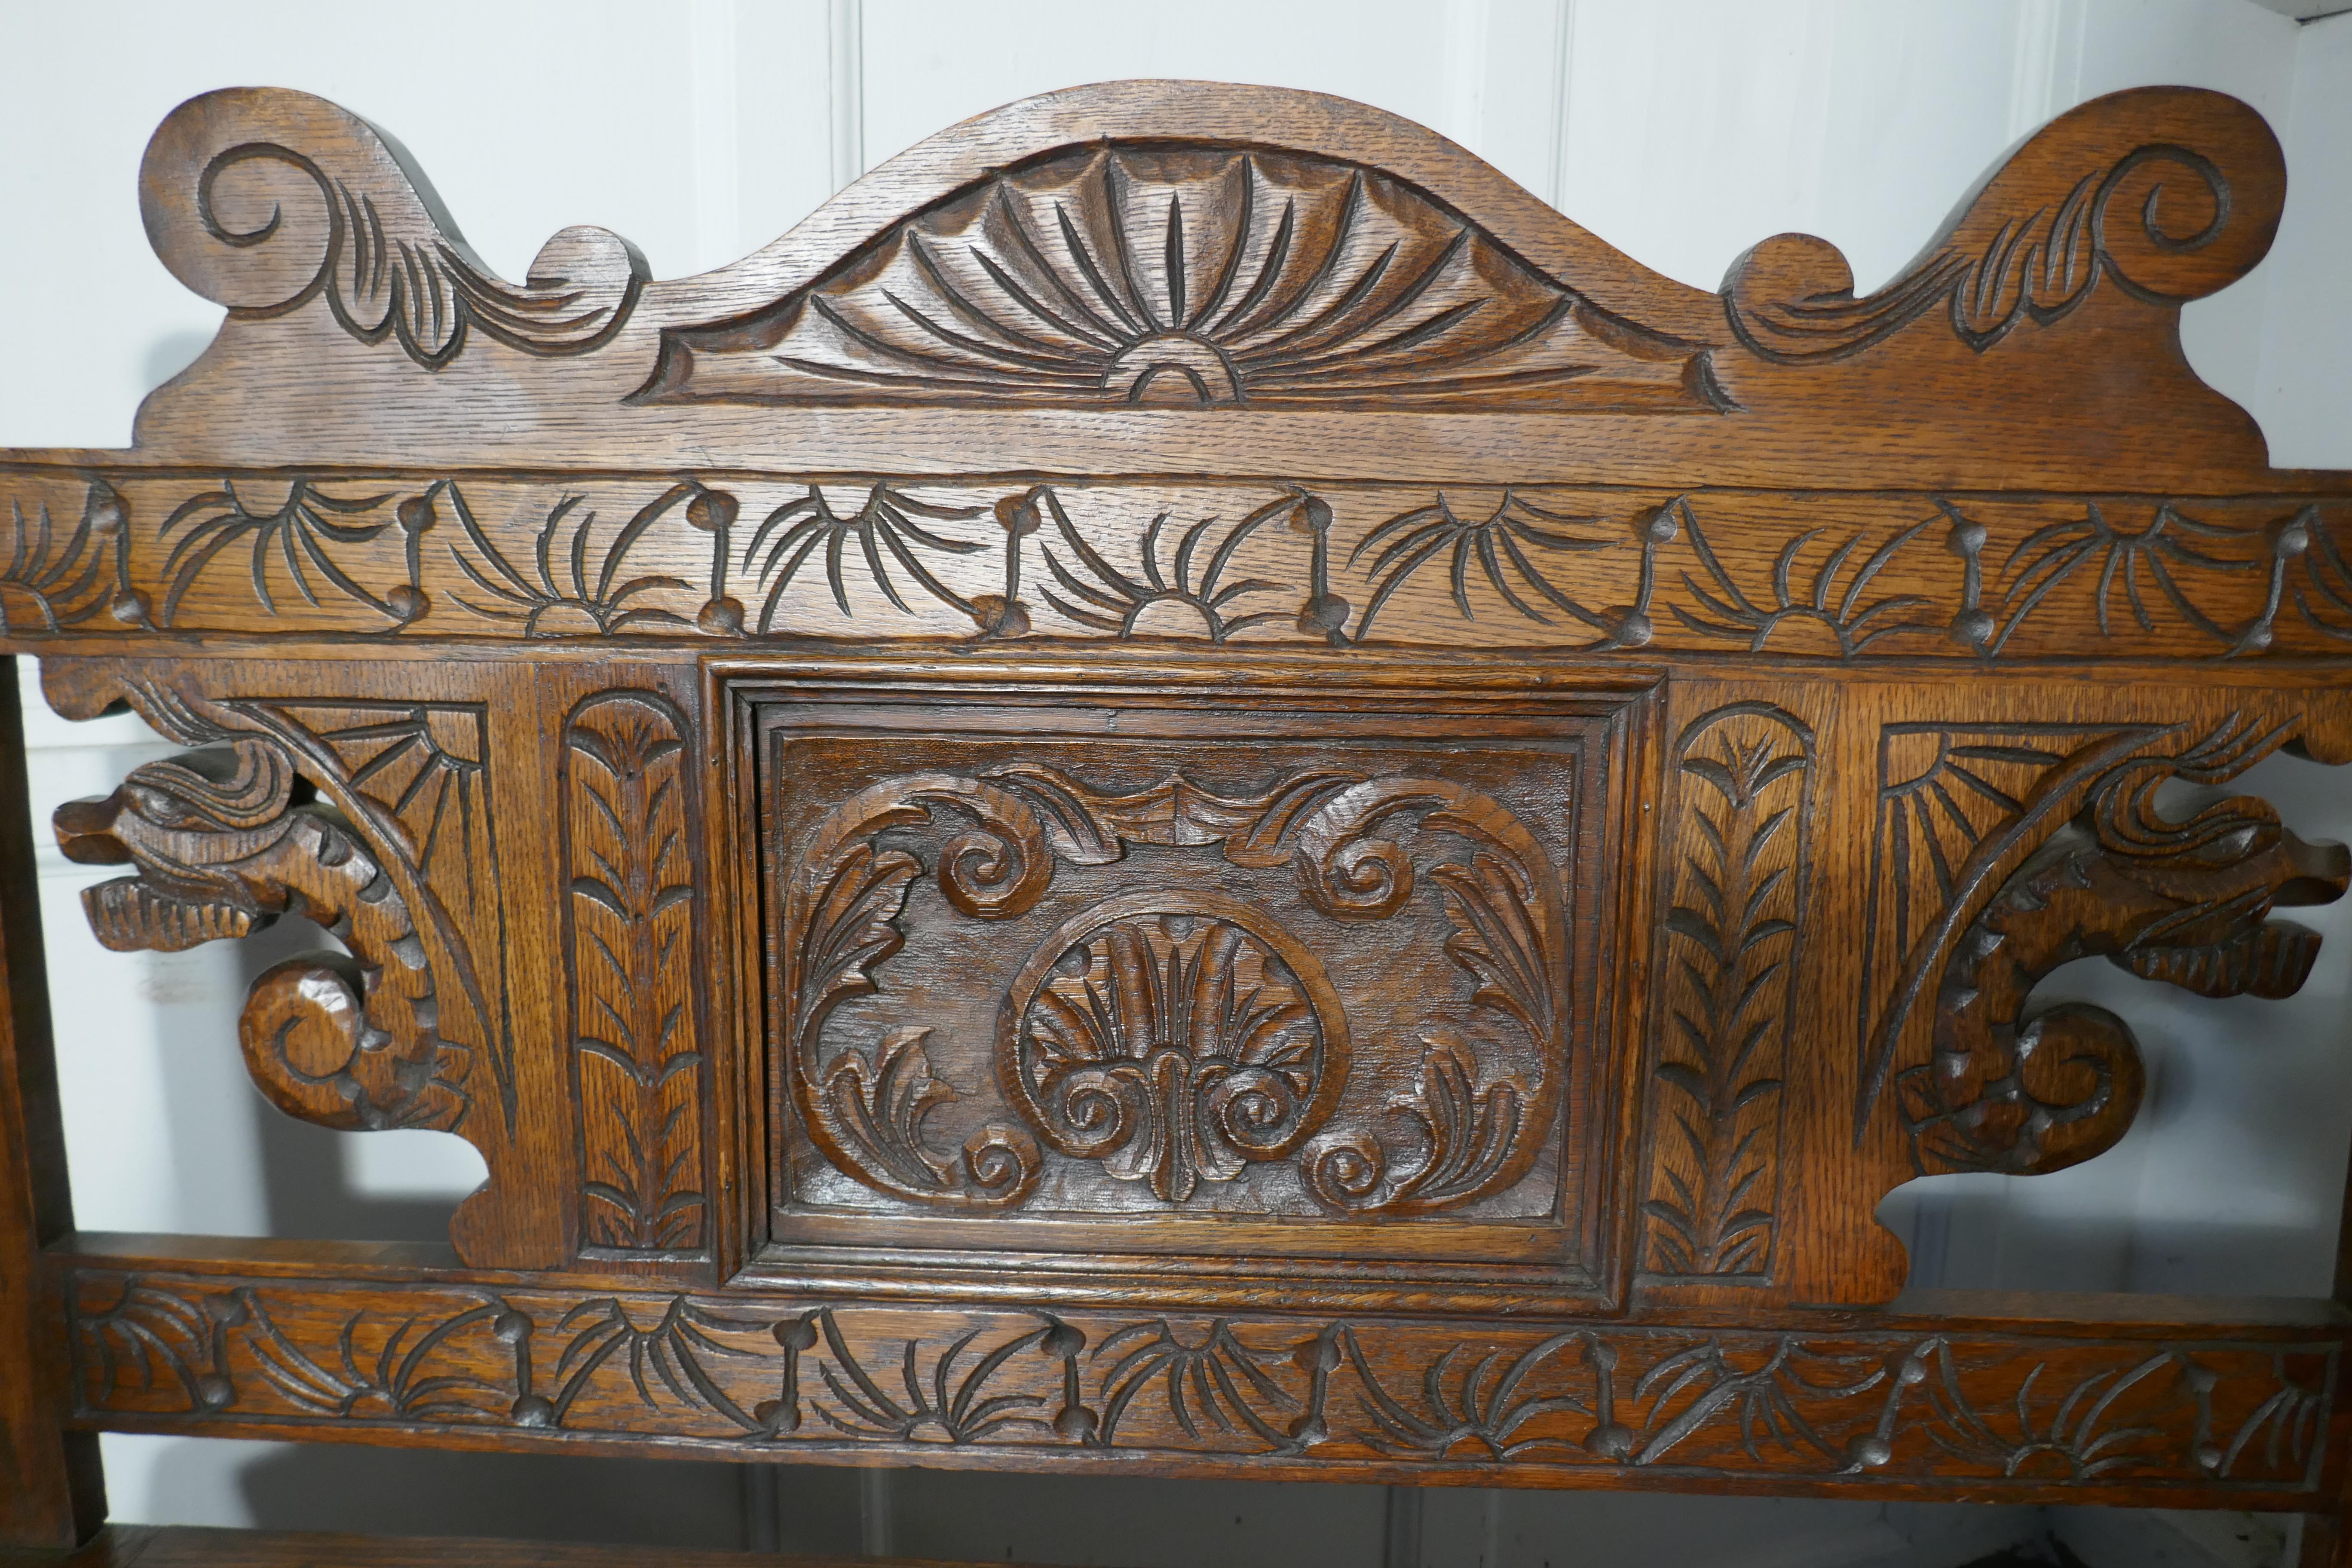 19th century Welsh high back carved oak box settle

The settle has a superbly carved back panel with fierce Dragons, and further carving at the bottom with the geometric and floral patterns, the seat opens for storage
The bench is a real country